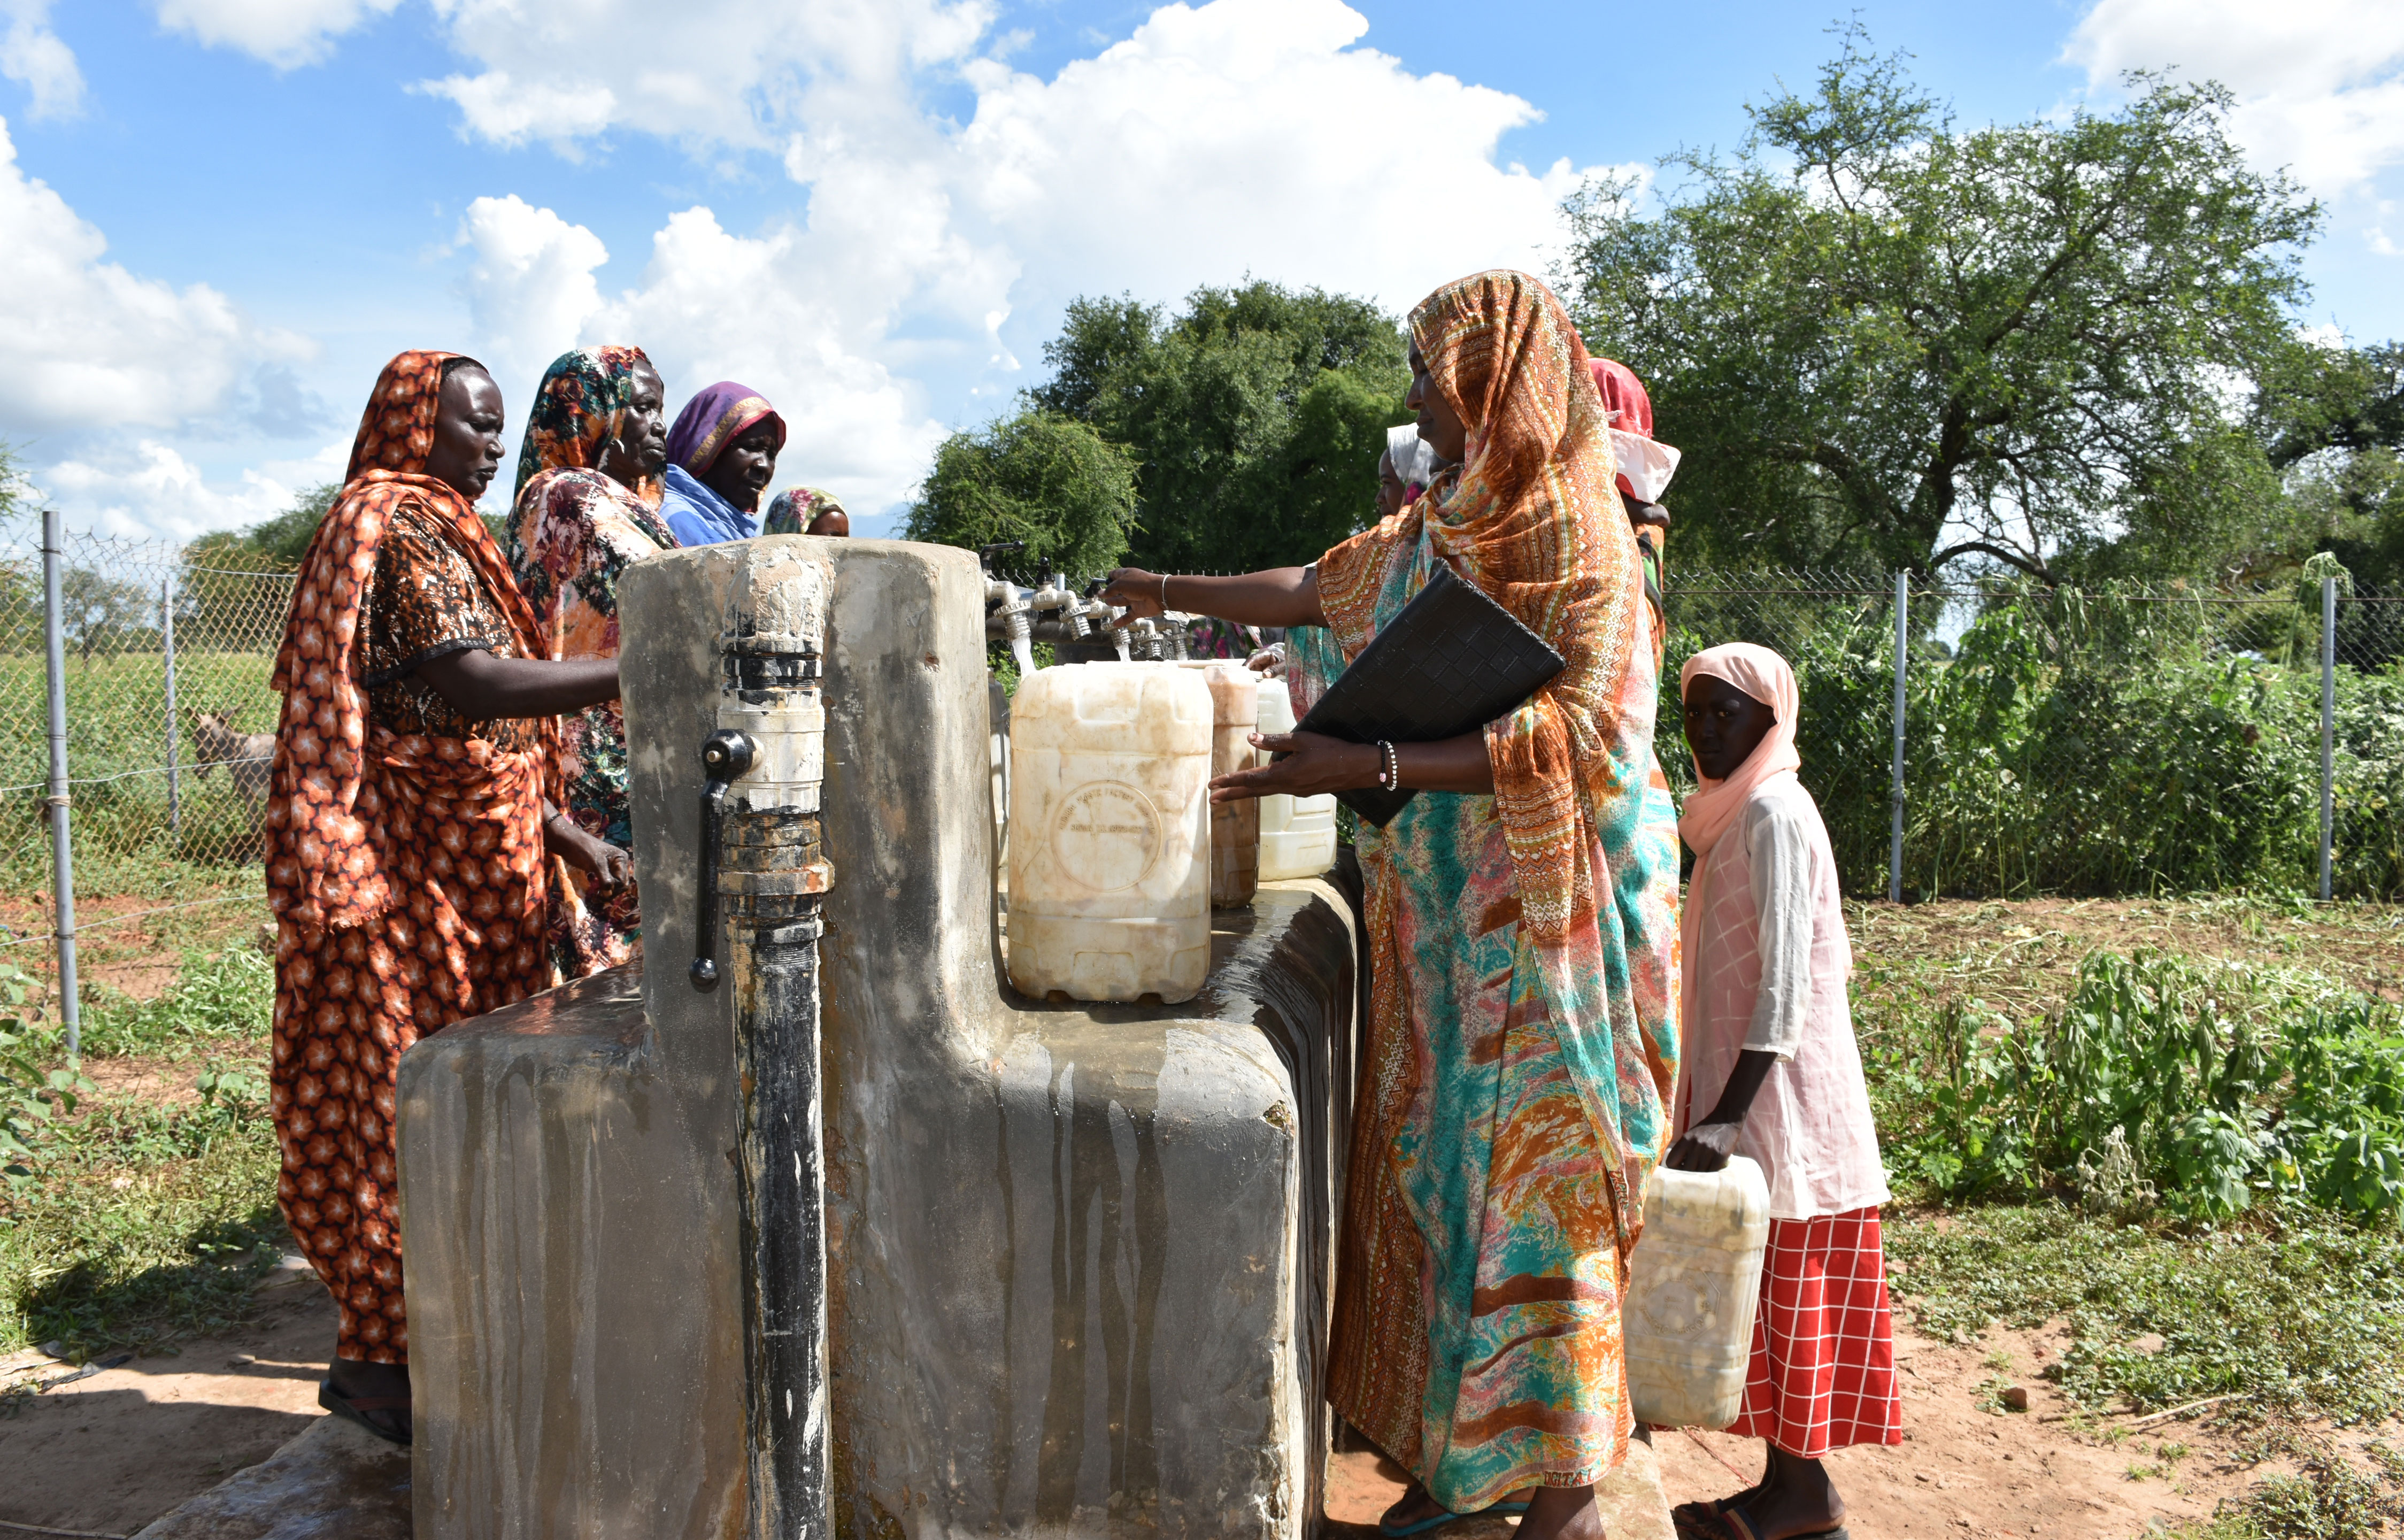 World Vision in East Darfur state, says the rehabilitation of the water system including installing with several distribution points has contributed to increasing the number of people who fetch water.